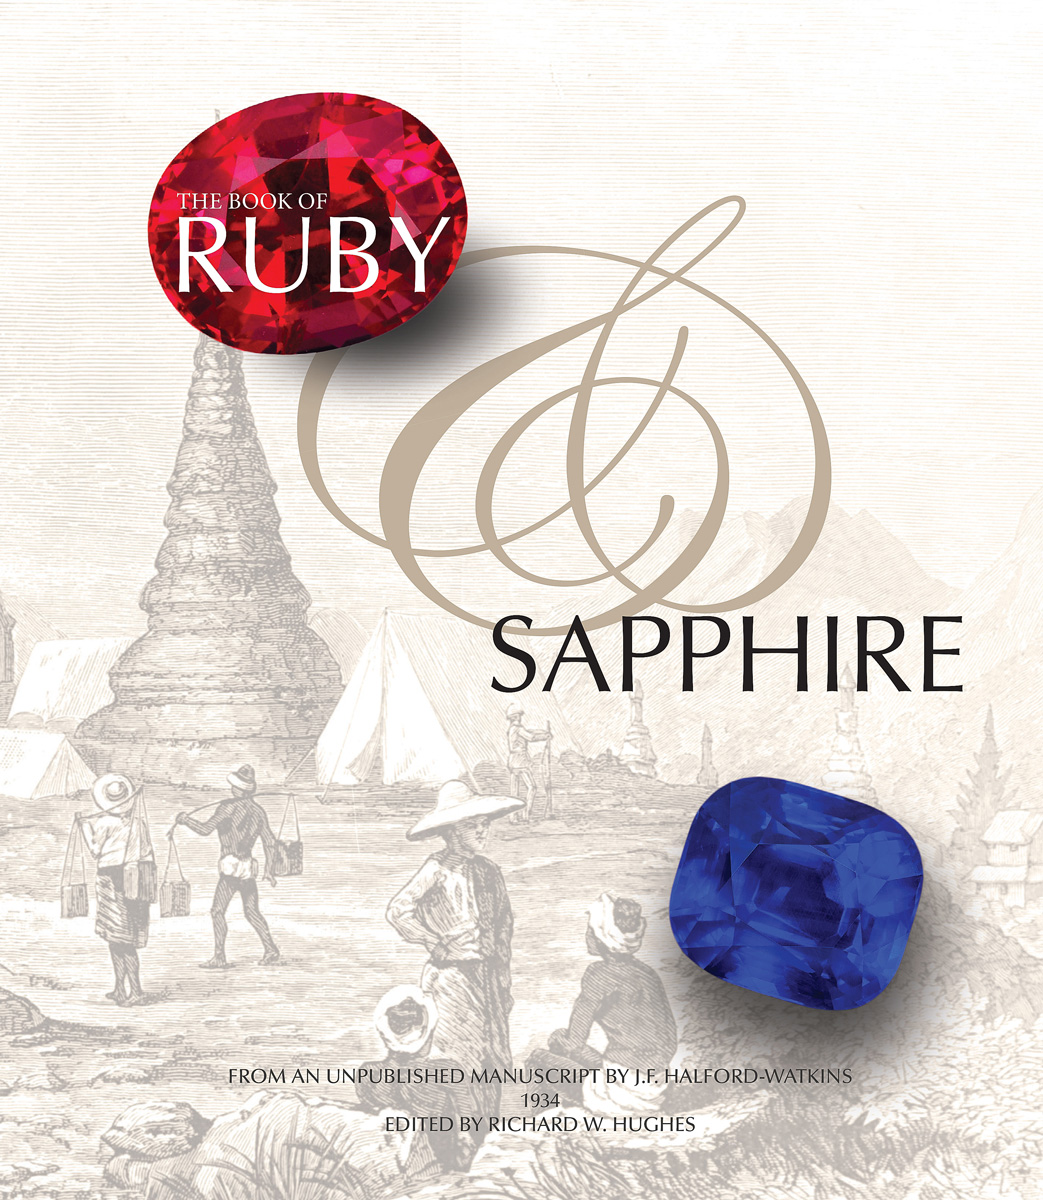 The cover of J.F. Halford-Watkins' Book of Ruby & Sapphire. This book, from an unpublished 1934 manuscript, was the first monograph devoted solely to the gemology of these gems. Sadly the author died before it could be published. The current author edited and published it in 2012.